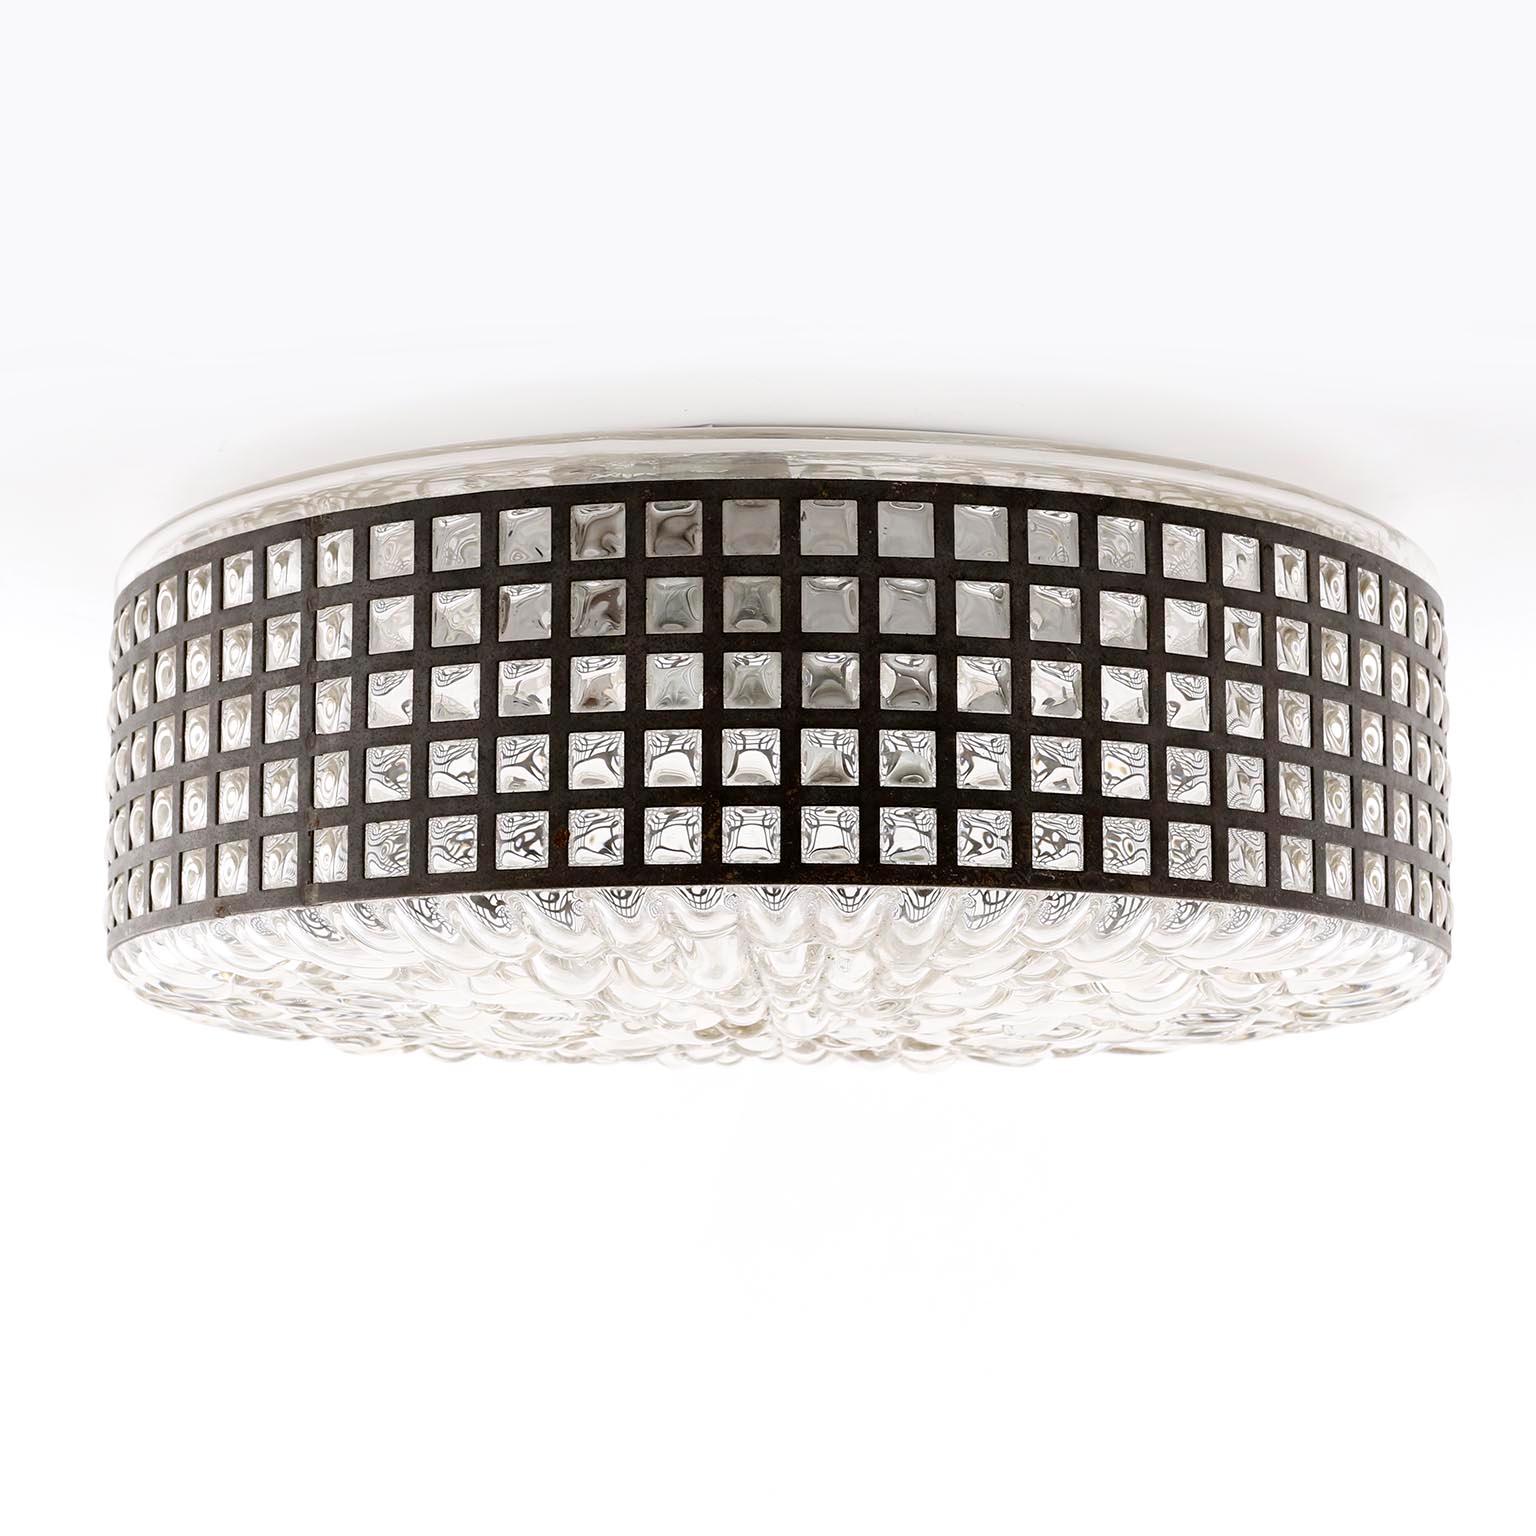 Mid-Century Modern Flush Mount Light by Rupert Nikoll, Textured Glass Patinated Metal, 1950, 1 of 2 For Sale